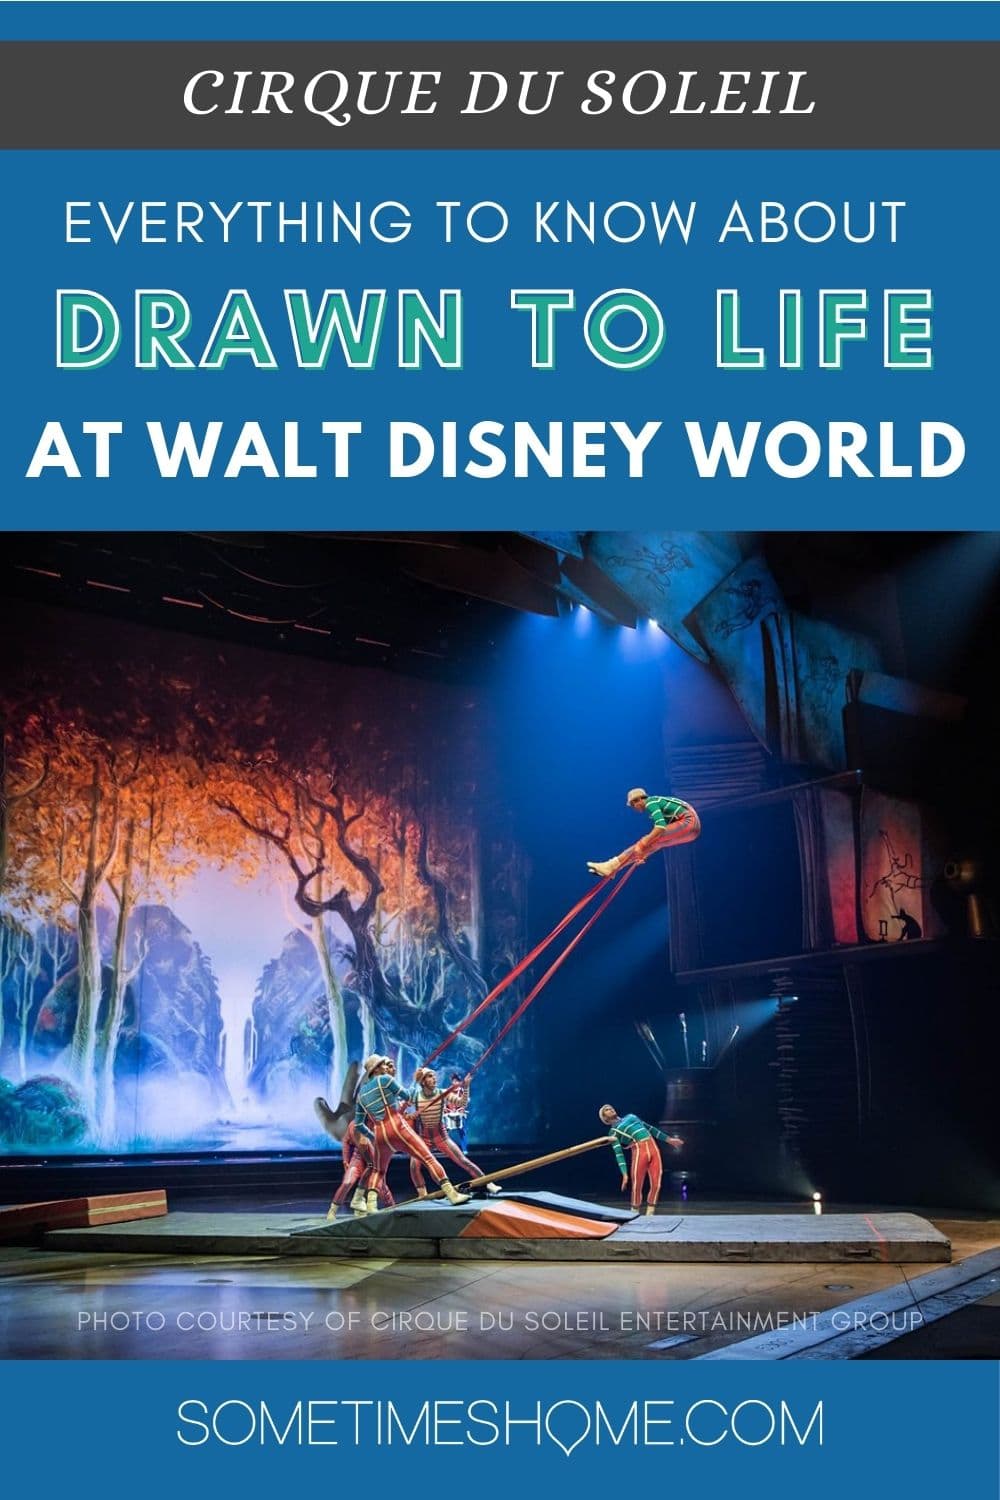 Cirque du Soleil Drawn to Life at Walt Disney World with a photo of the performers on stage doing acrobatics and theatrical lighting.